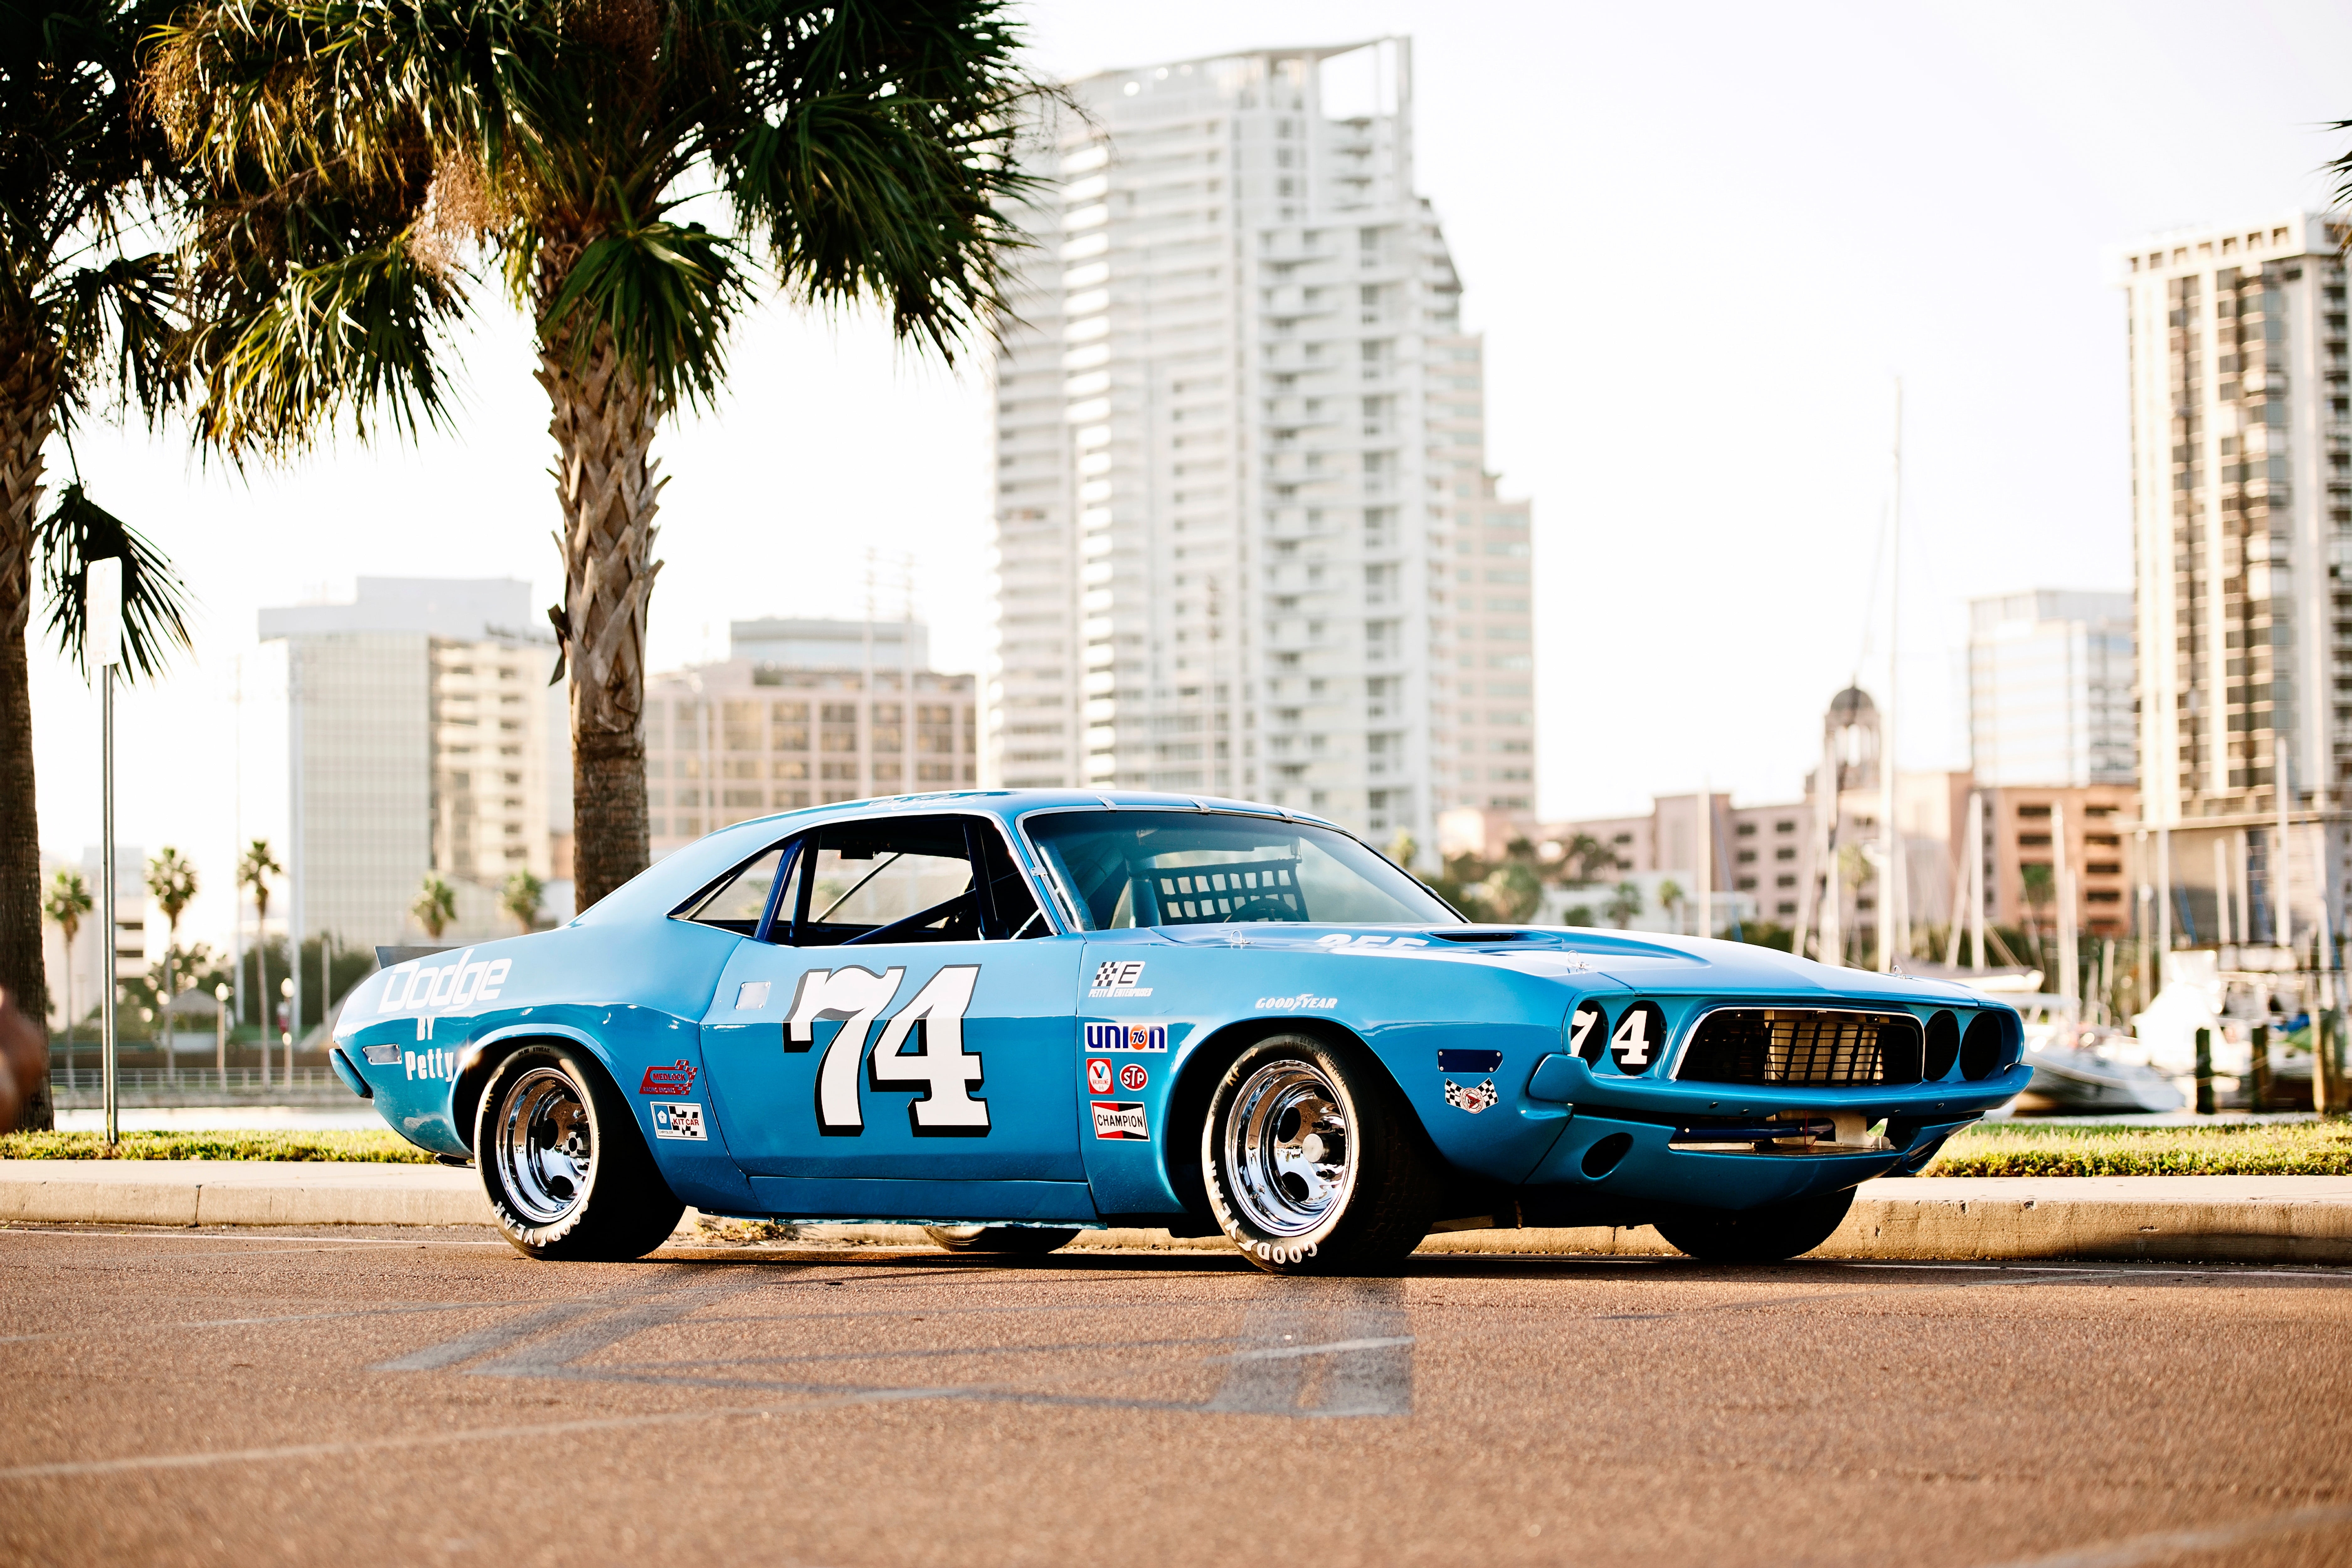 Muscle Car Hd Wallpaper - mywallpapers site